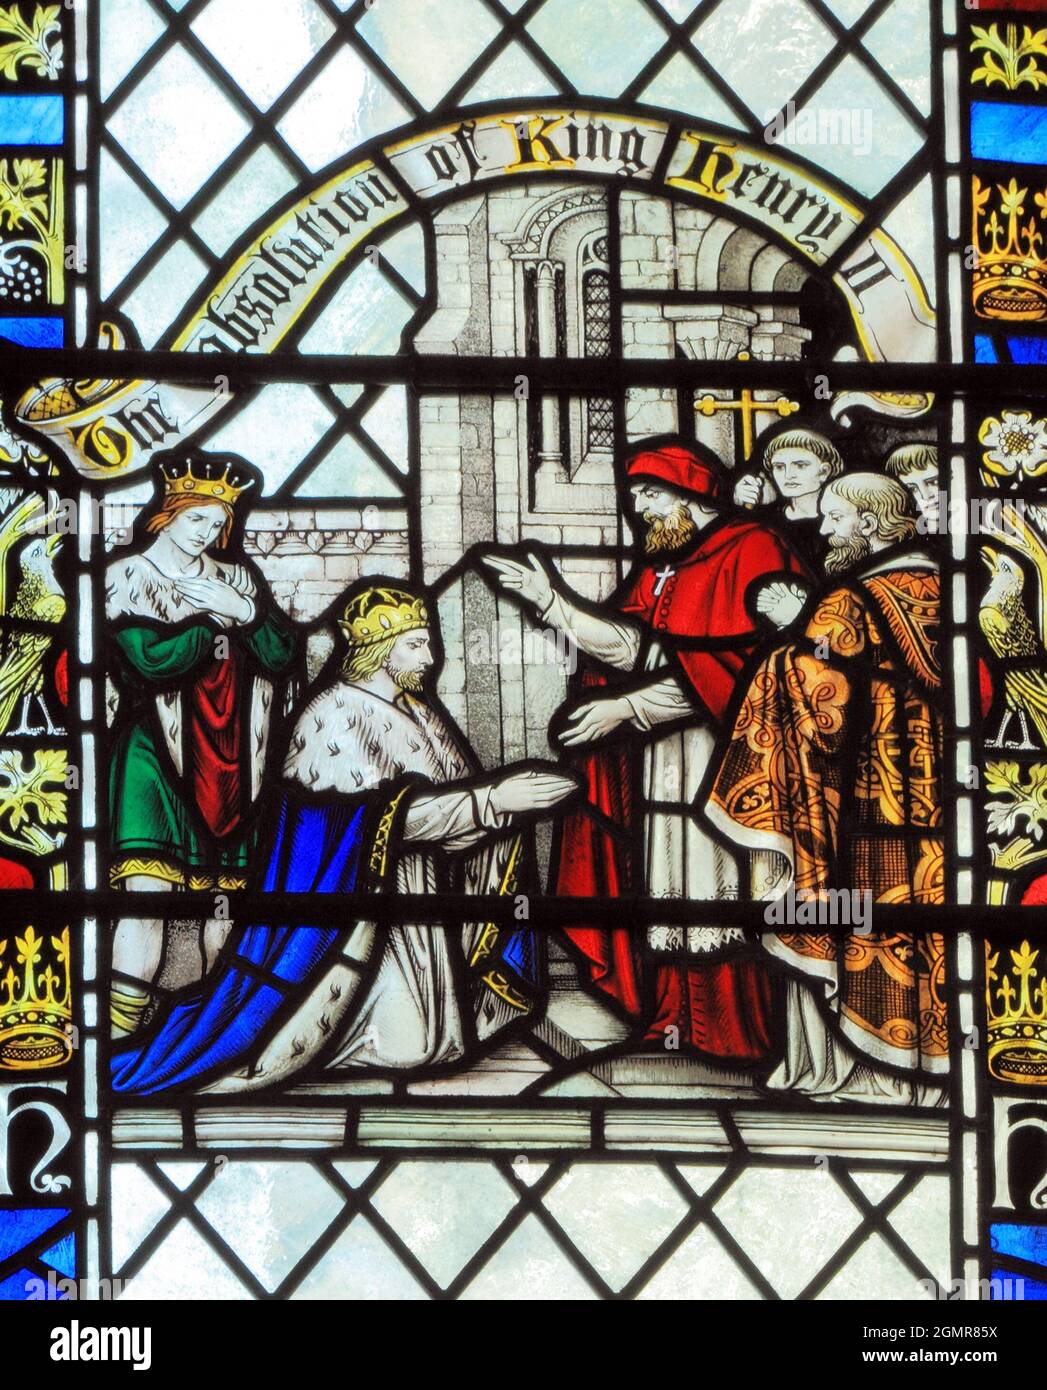 Absolution of King Henry 2nd, after murder of Thomas Becket, stained glass, Blakeney, Norfolk, England Stock Photo